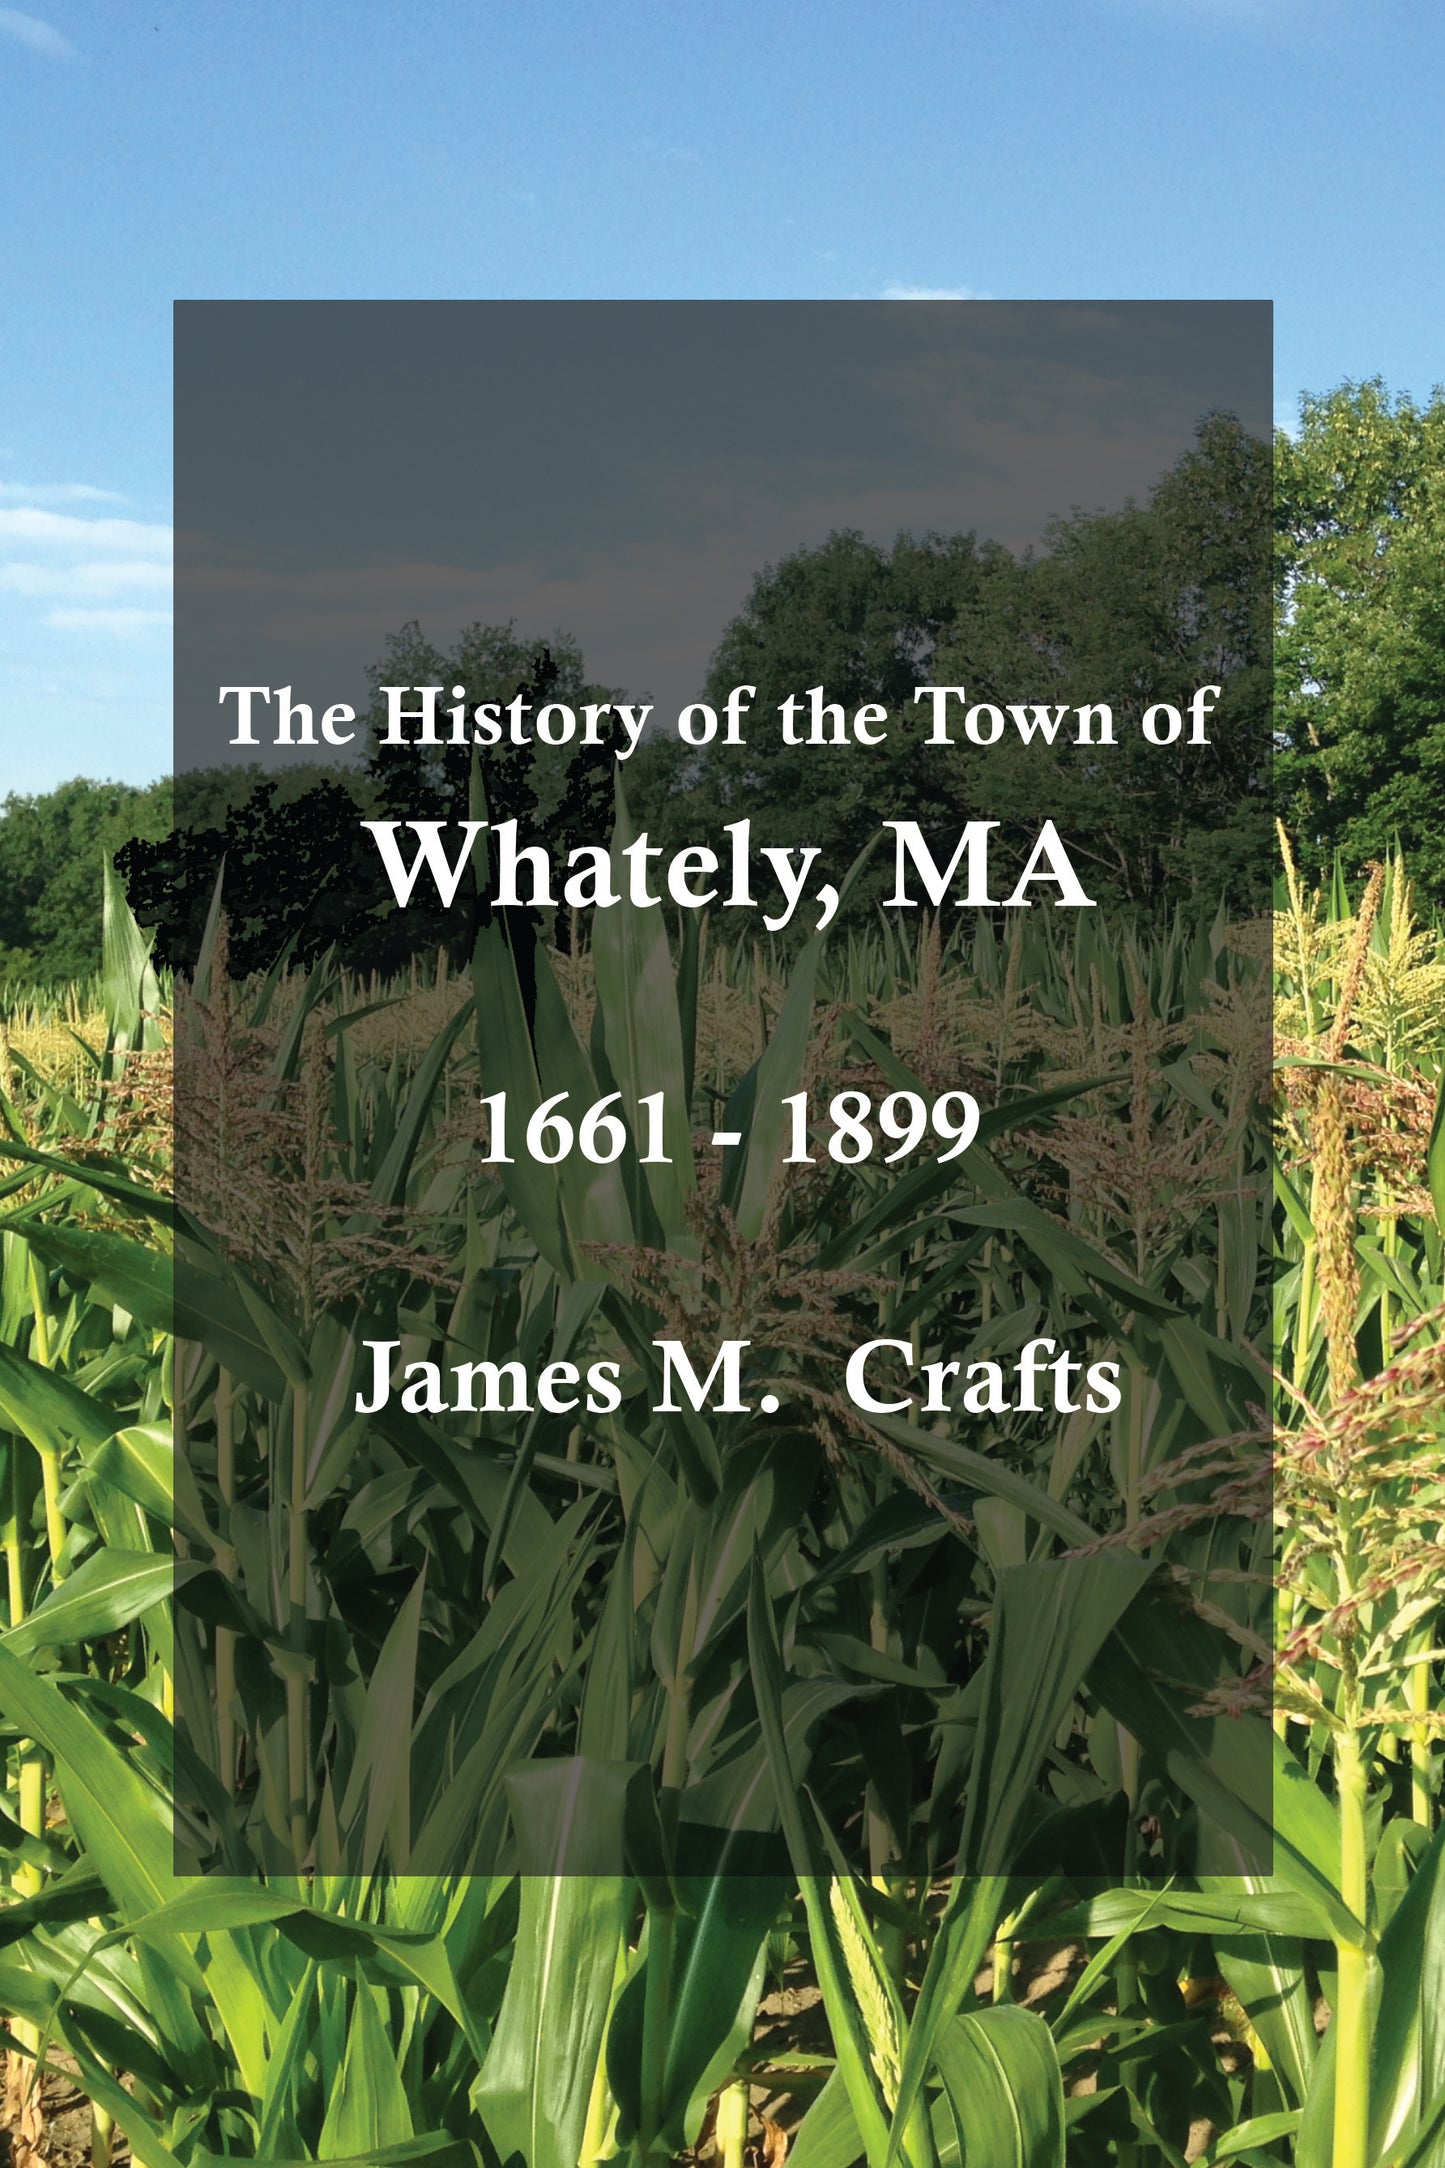 The History of the Town of Whatley, MA